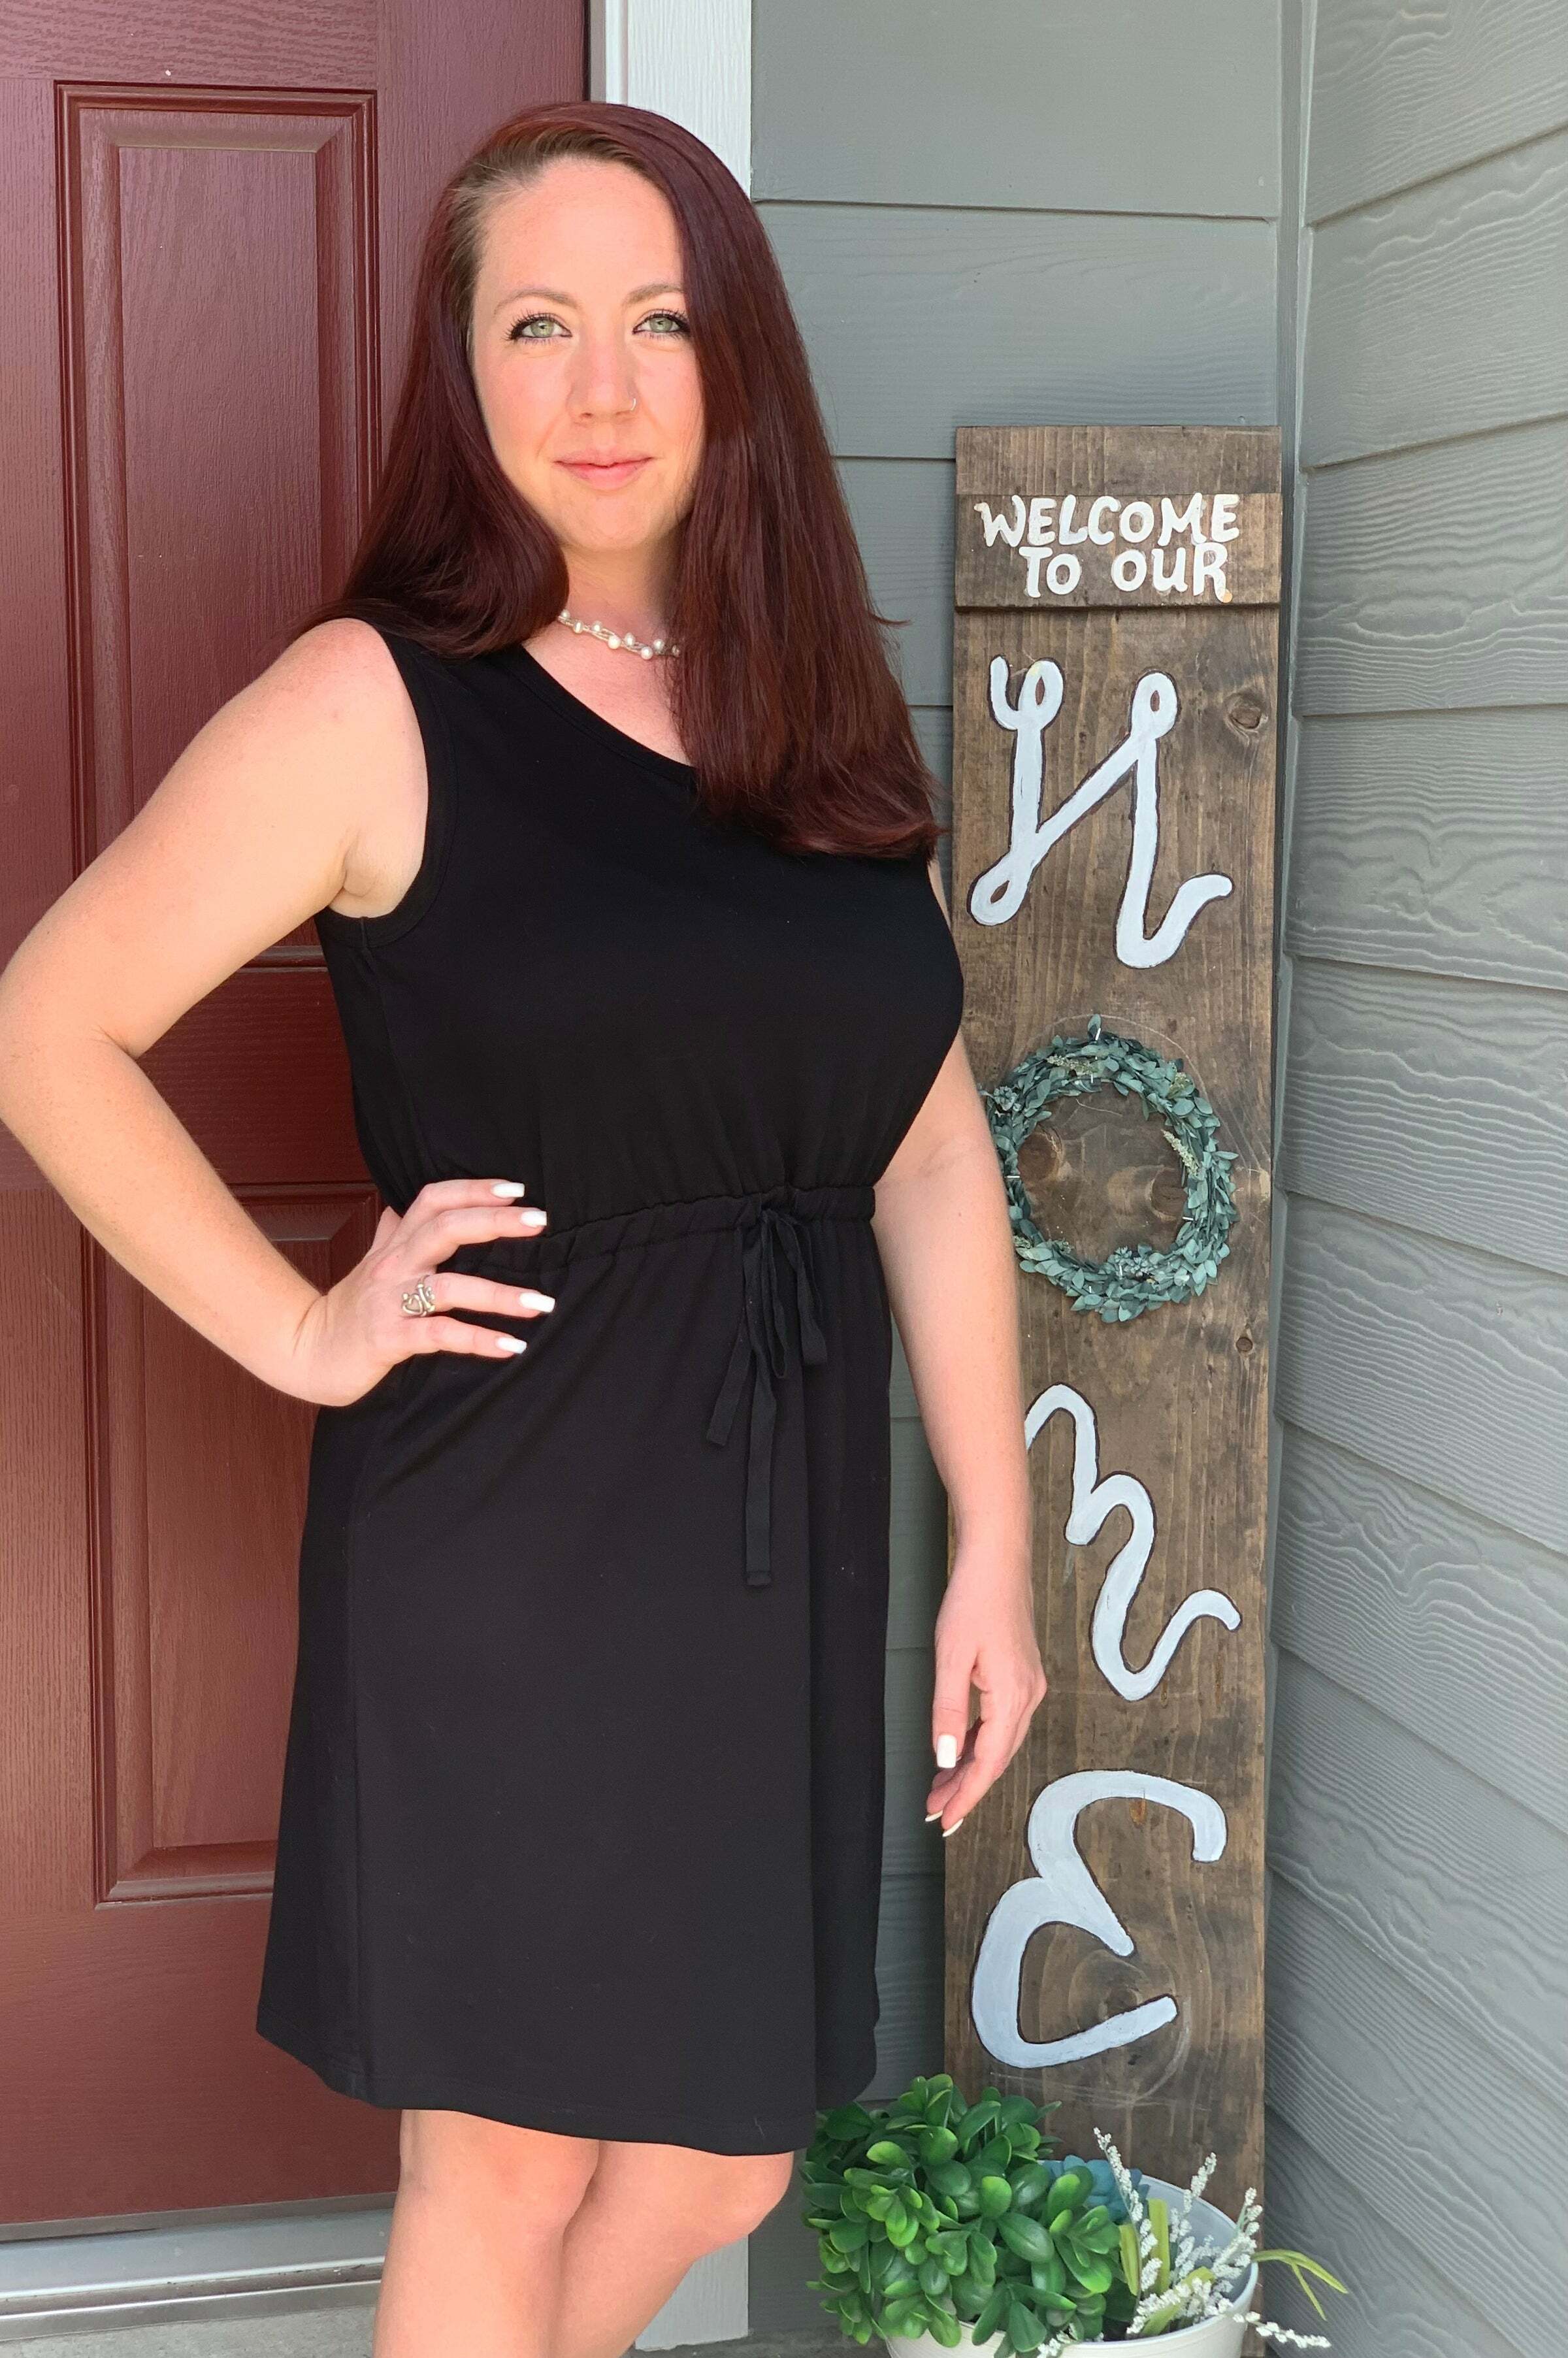 Kaitlin New, Real Estate Salesperson in Katy, Western Realty